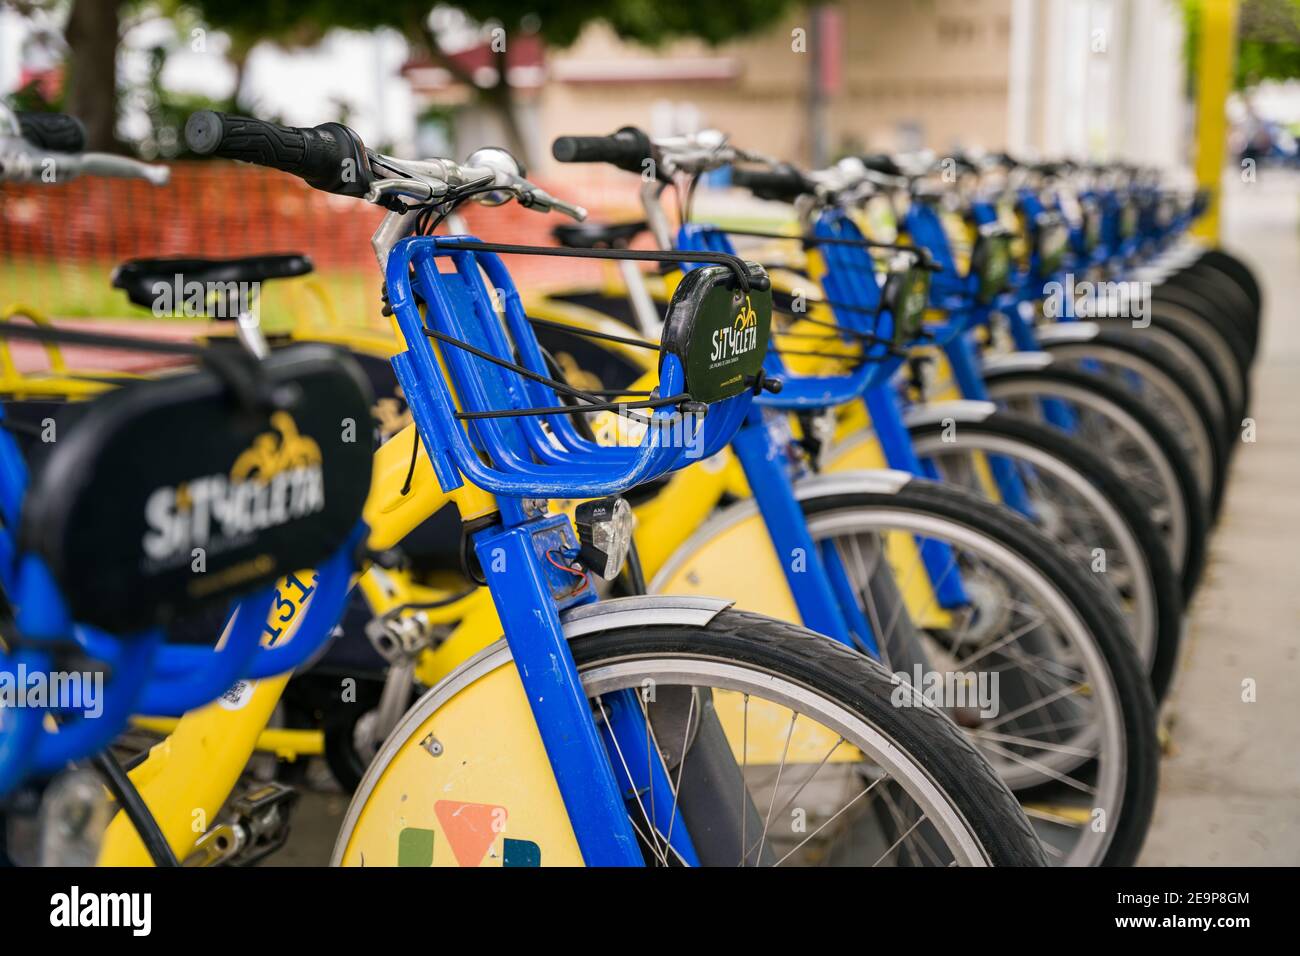 Las Palmas, Spain - August 8, 2020. Close up of handlebar. Group of many public city bicycles parked in rack row. Smart eco friendly transport Stock Photo